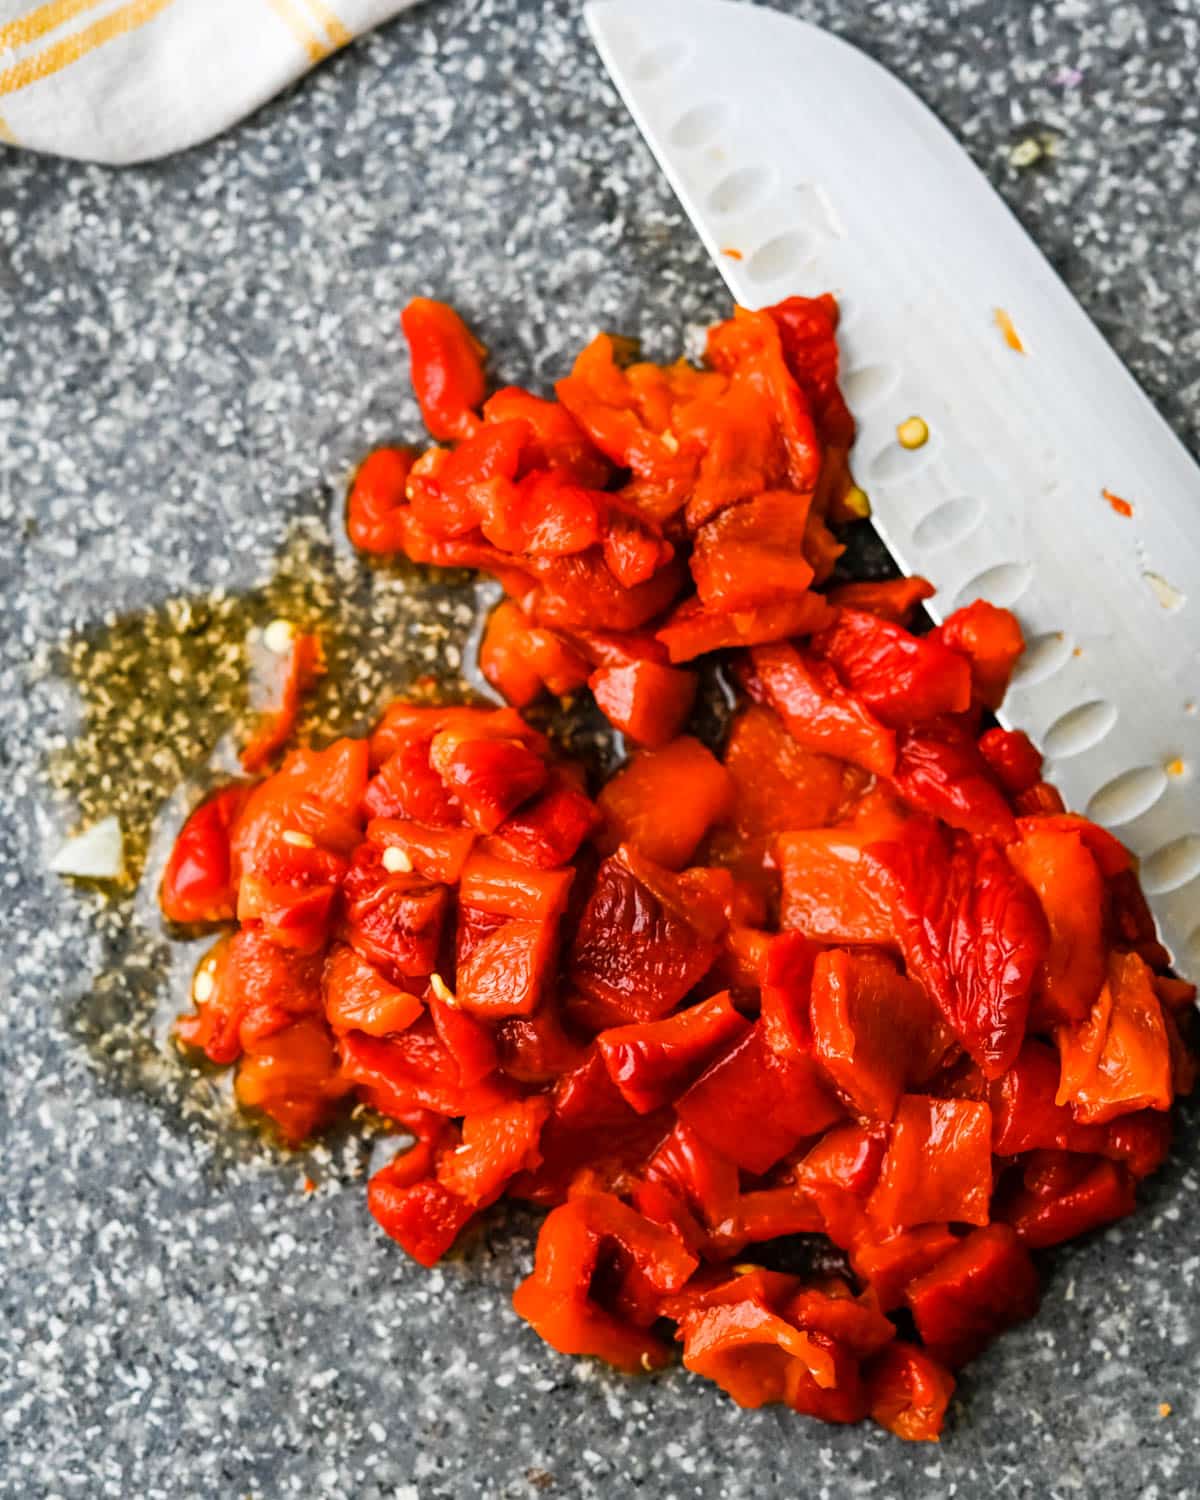 I am chopping roasted red peppers on a cutting board.